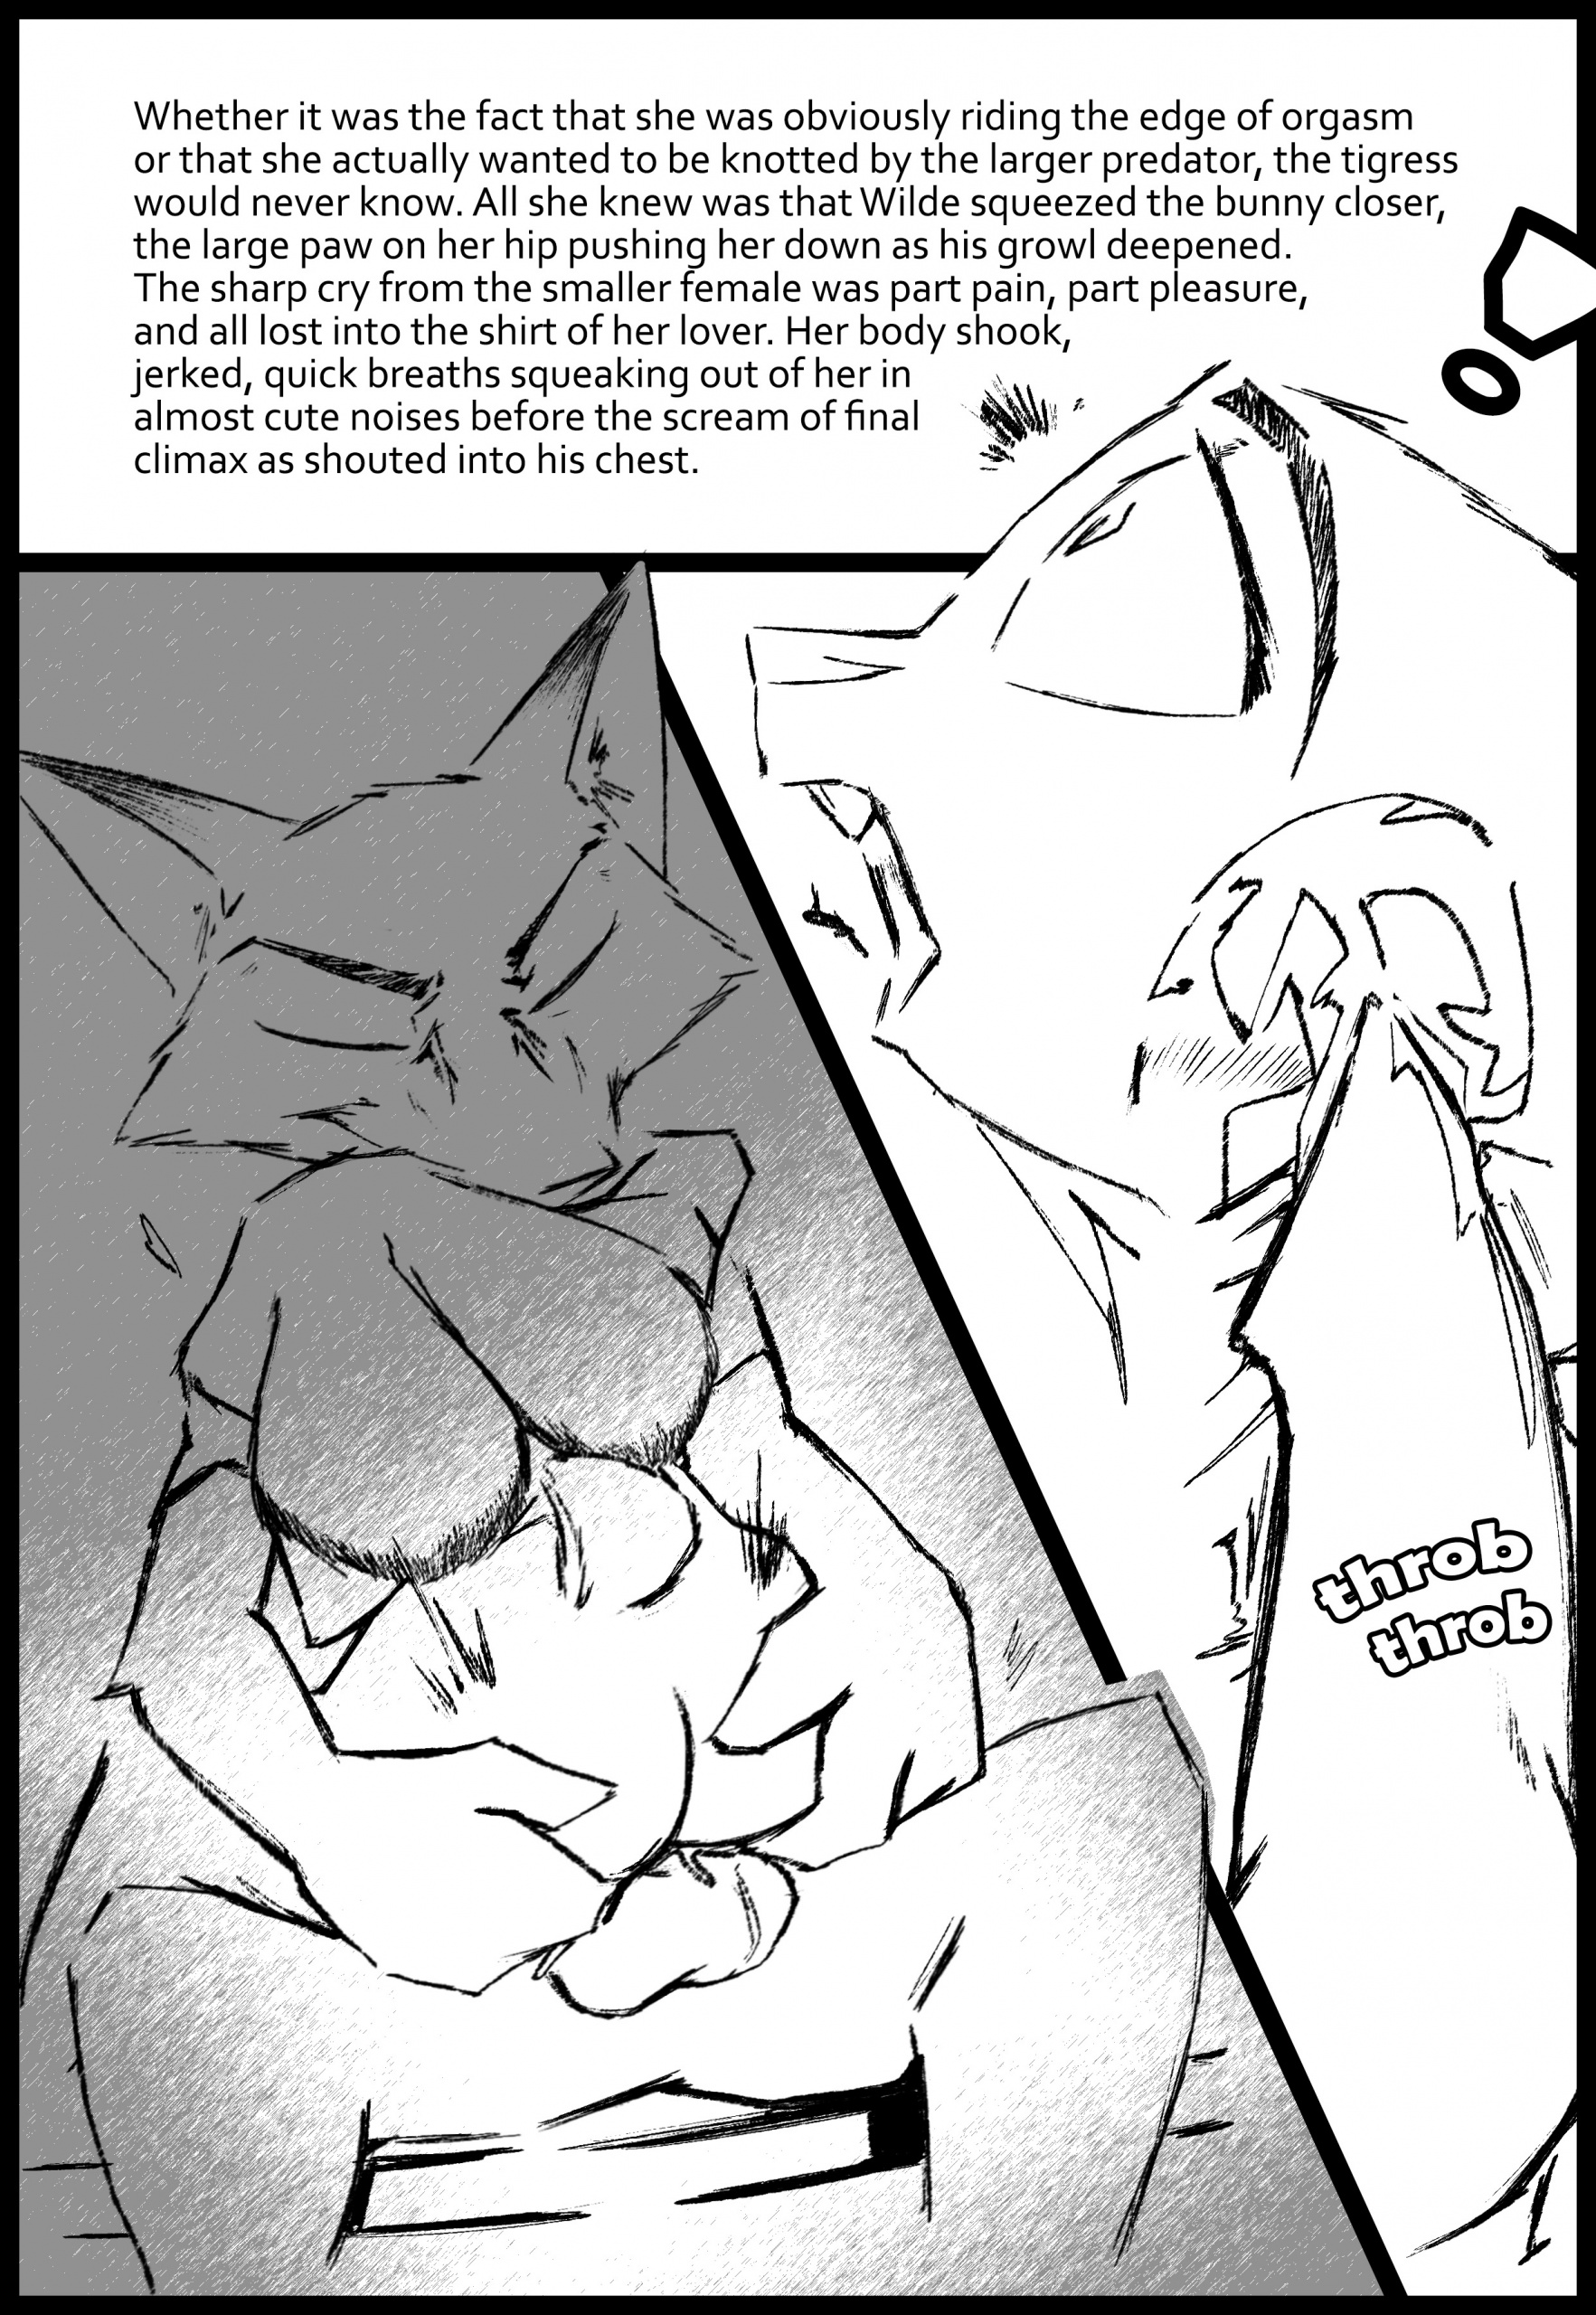 Wilde Academy - Chapter 4 porn comics Oral sex, Furry